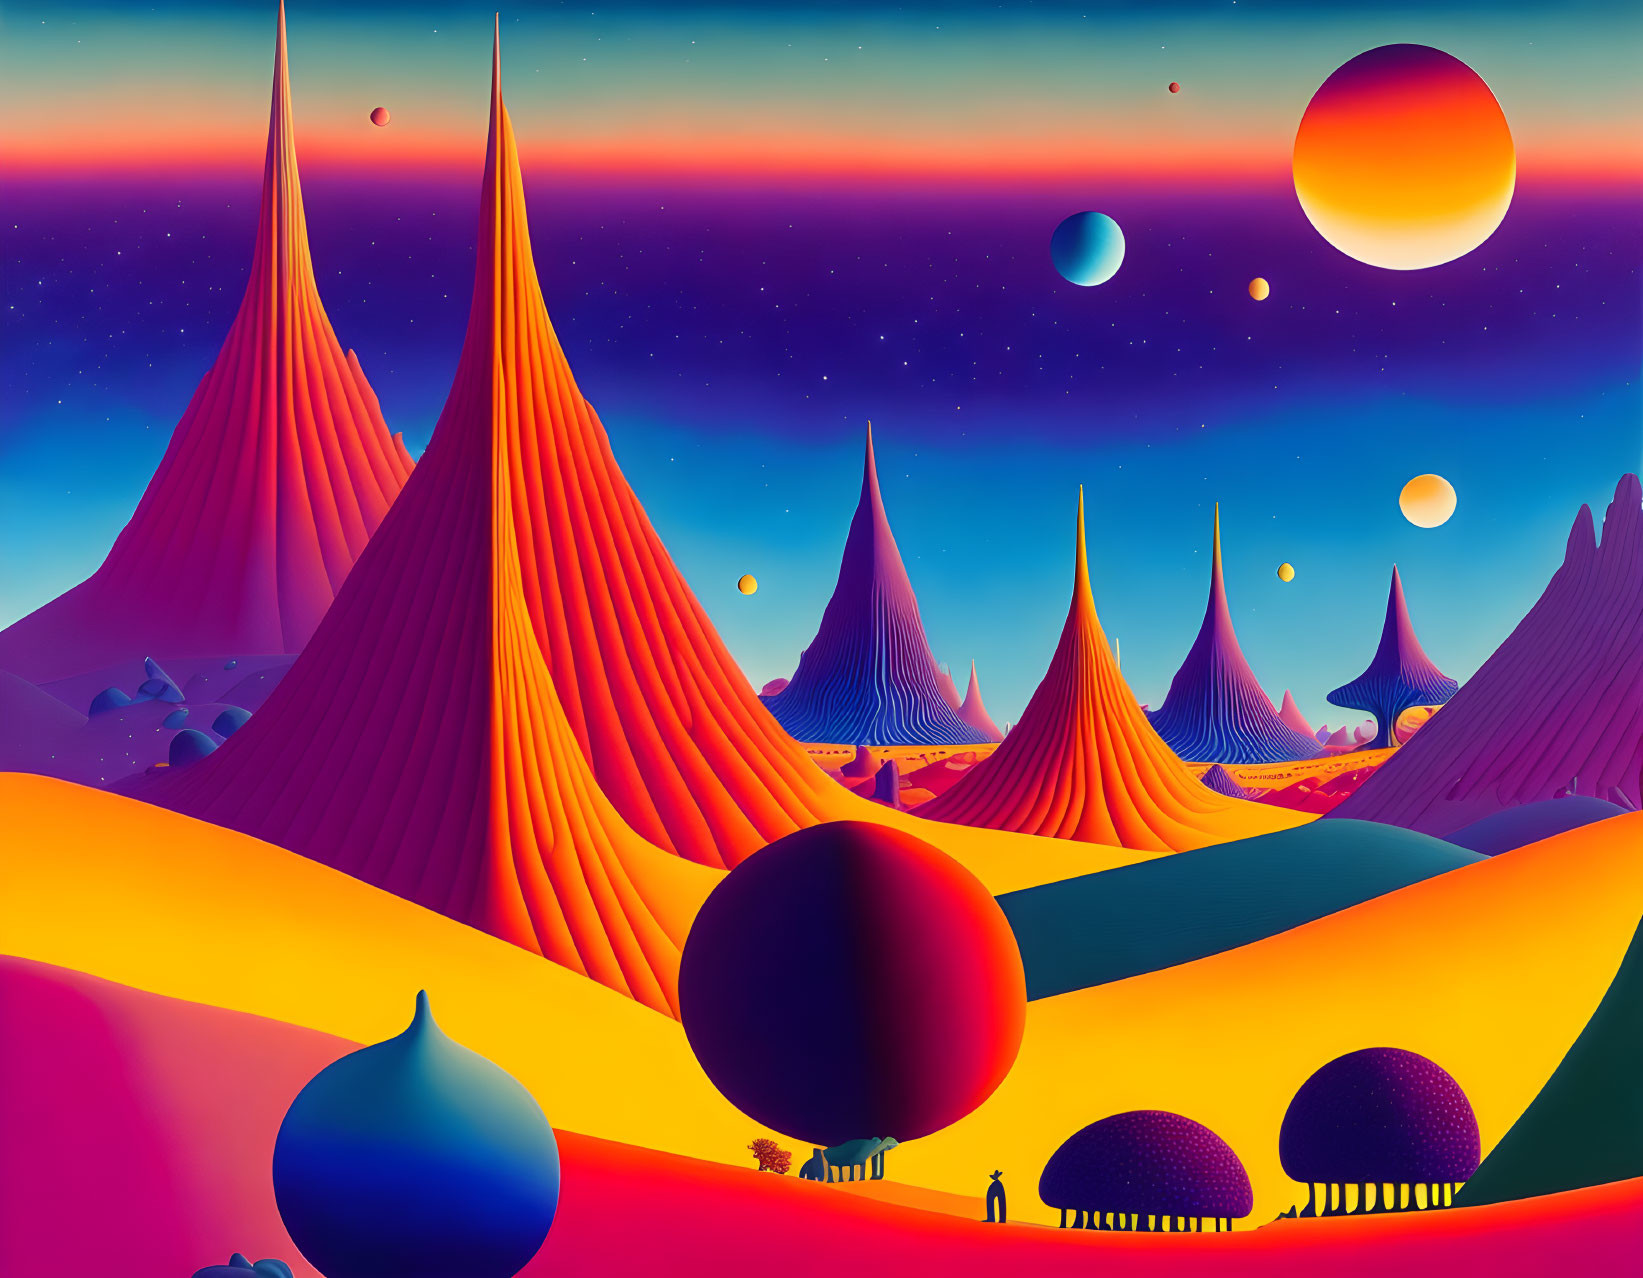 Colorful surreal landscape with conical mountains and celestial bodies.